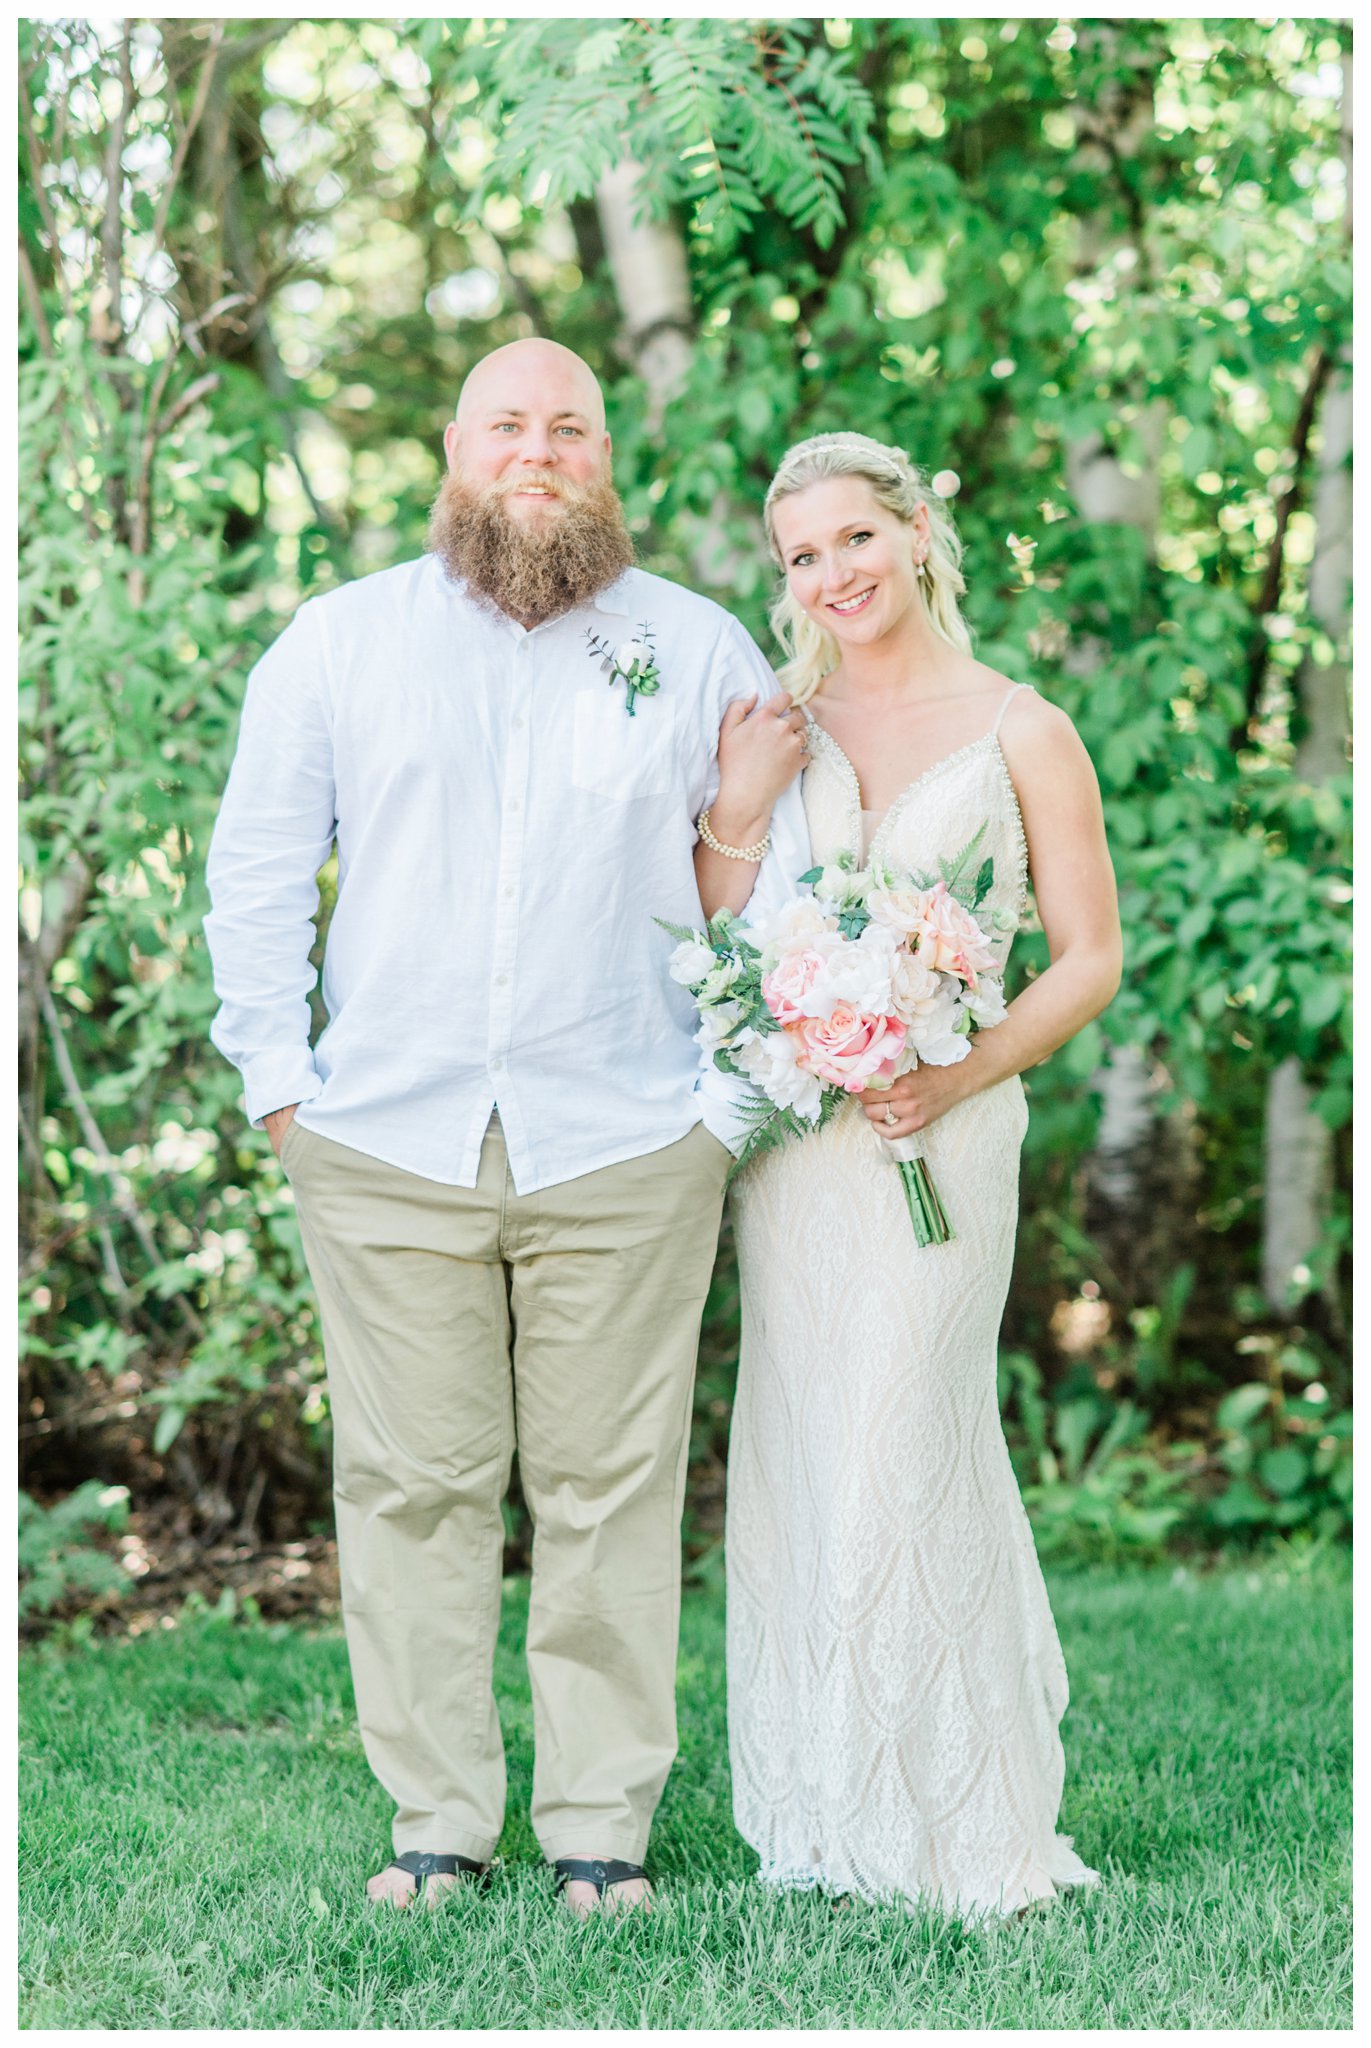 Bride and groom portraits from a summer Bluefin Bay Wedding. Photo by Kayla Lee.